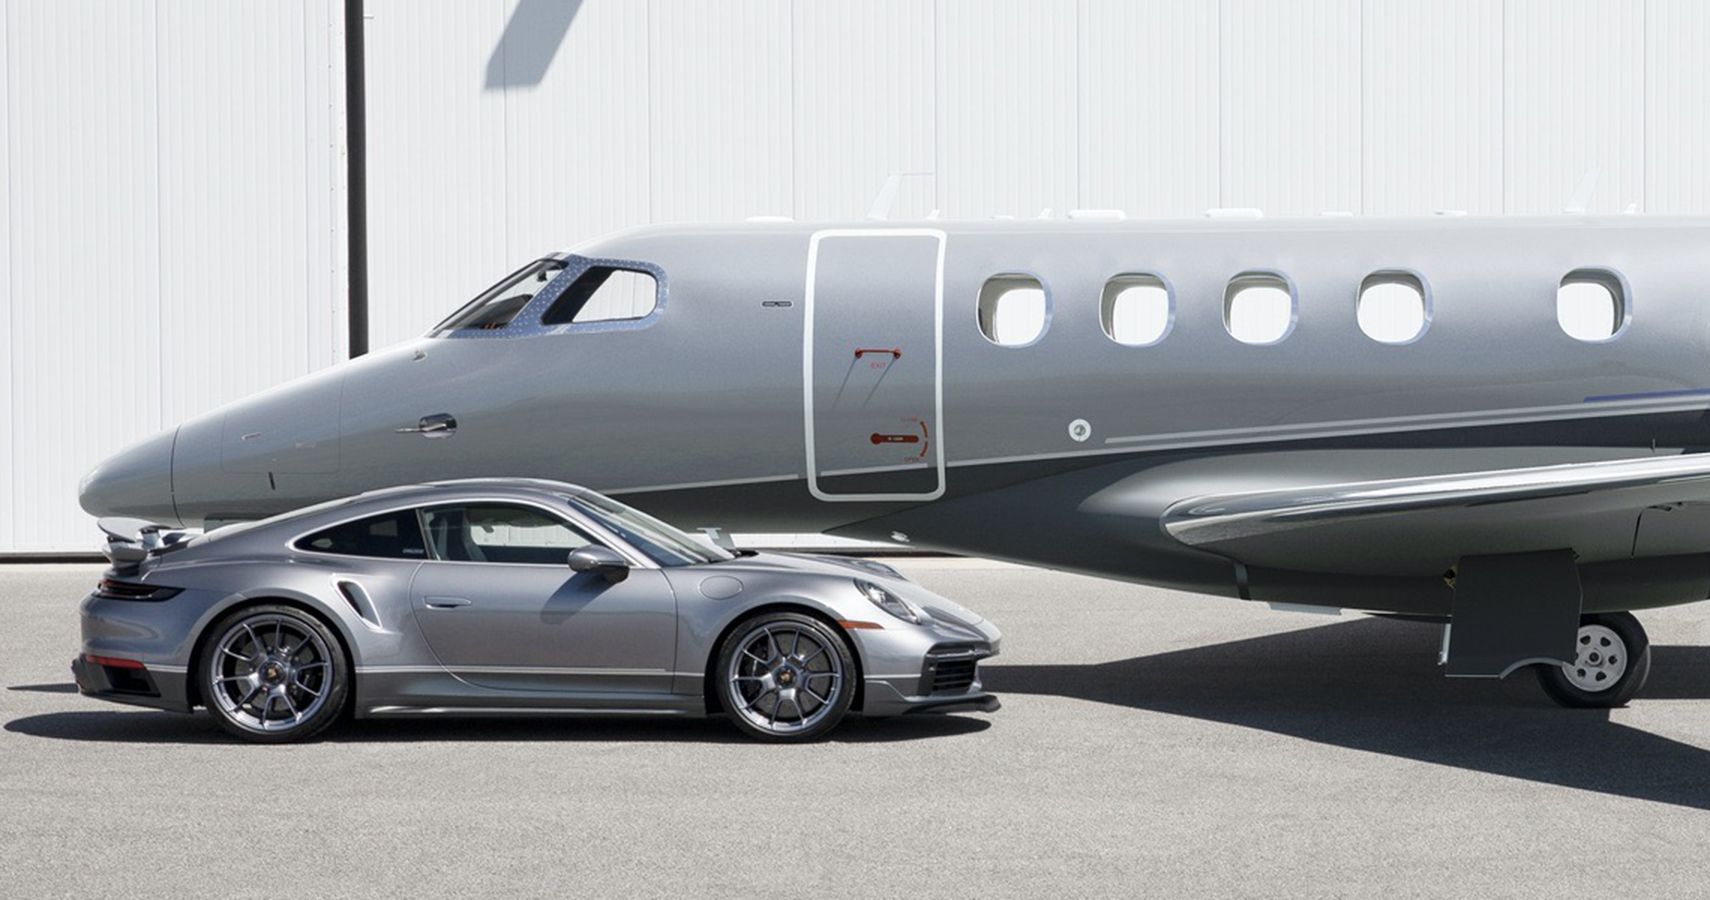 Porsche 911 Turbo S and Embraer Phenom 300E Duet limited editions